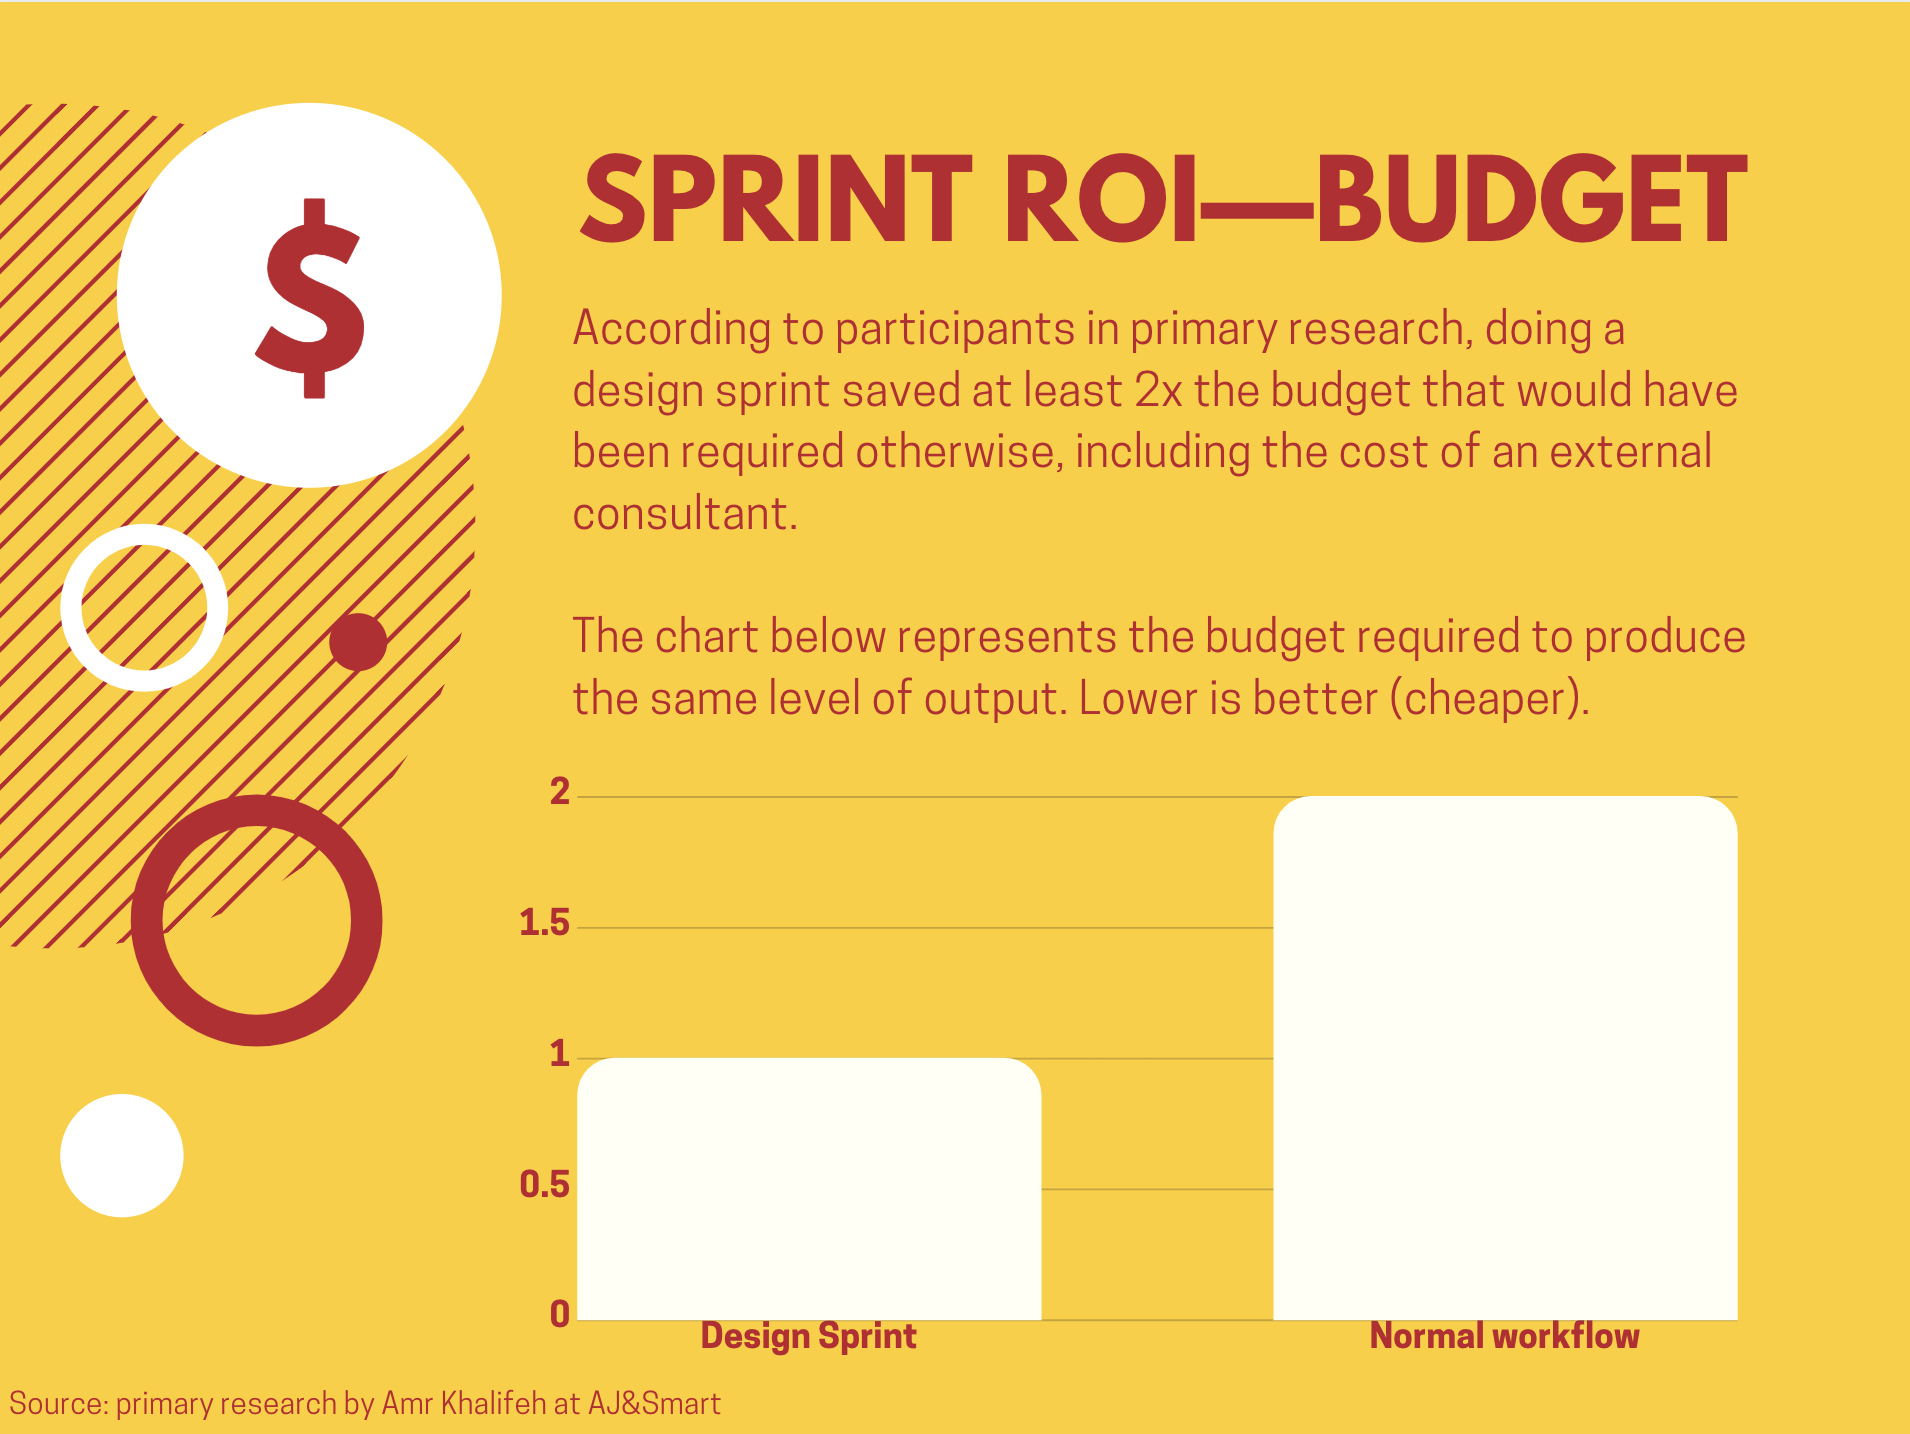 Design Sprint saved at least twice the budget required